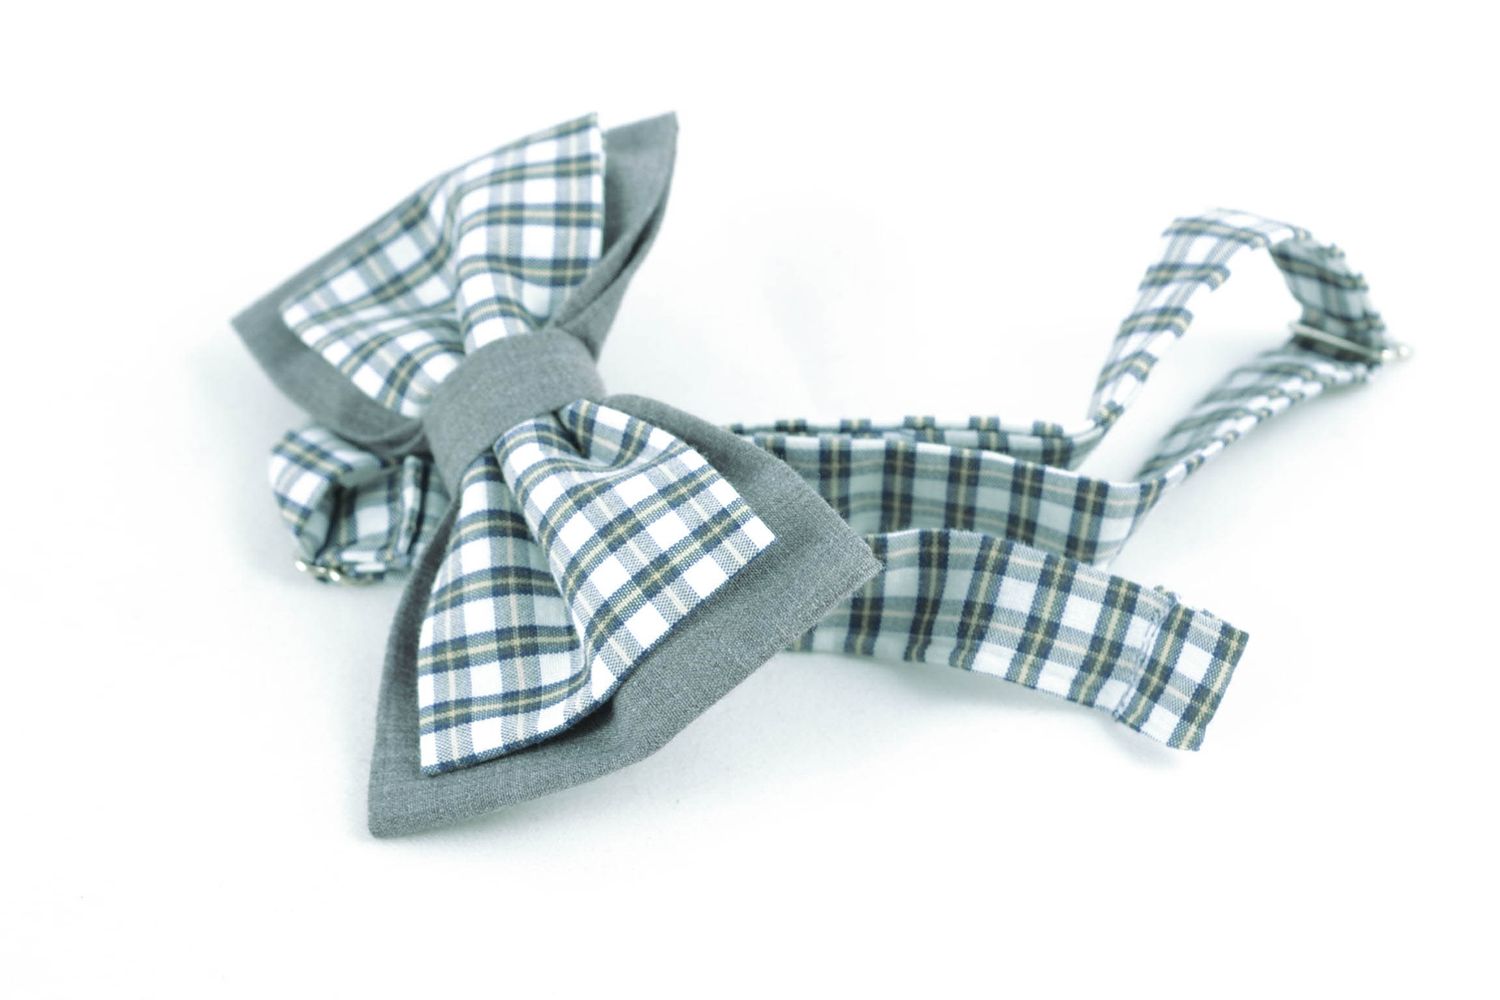 Fabric bow tie for tweed jacket photo 5